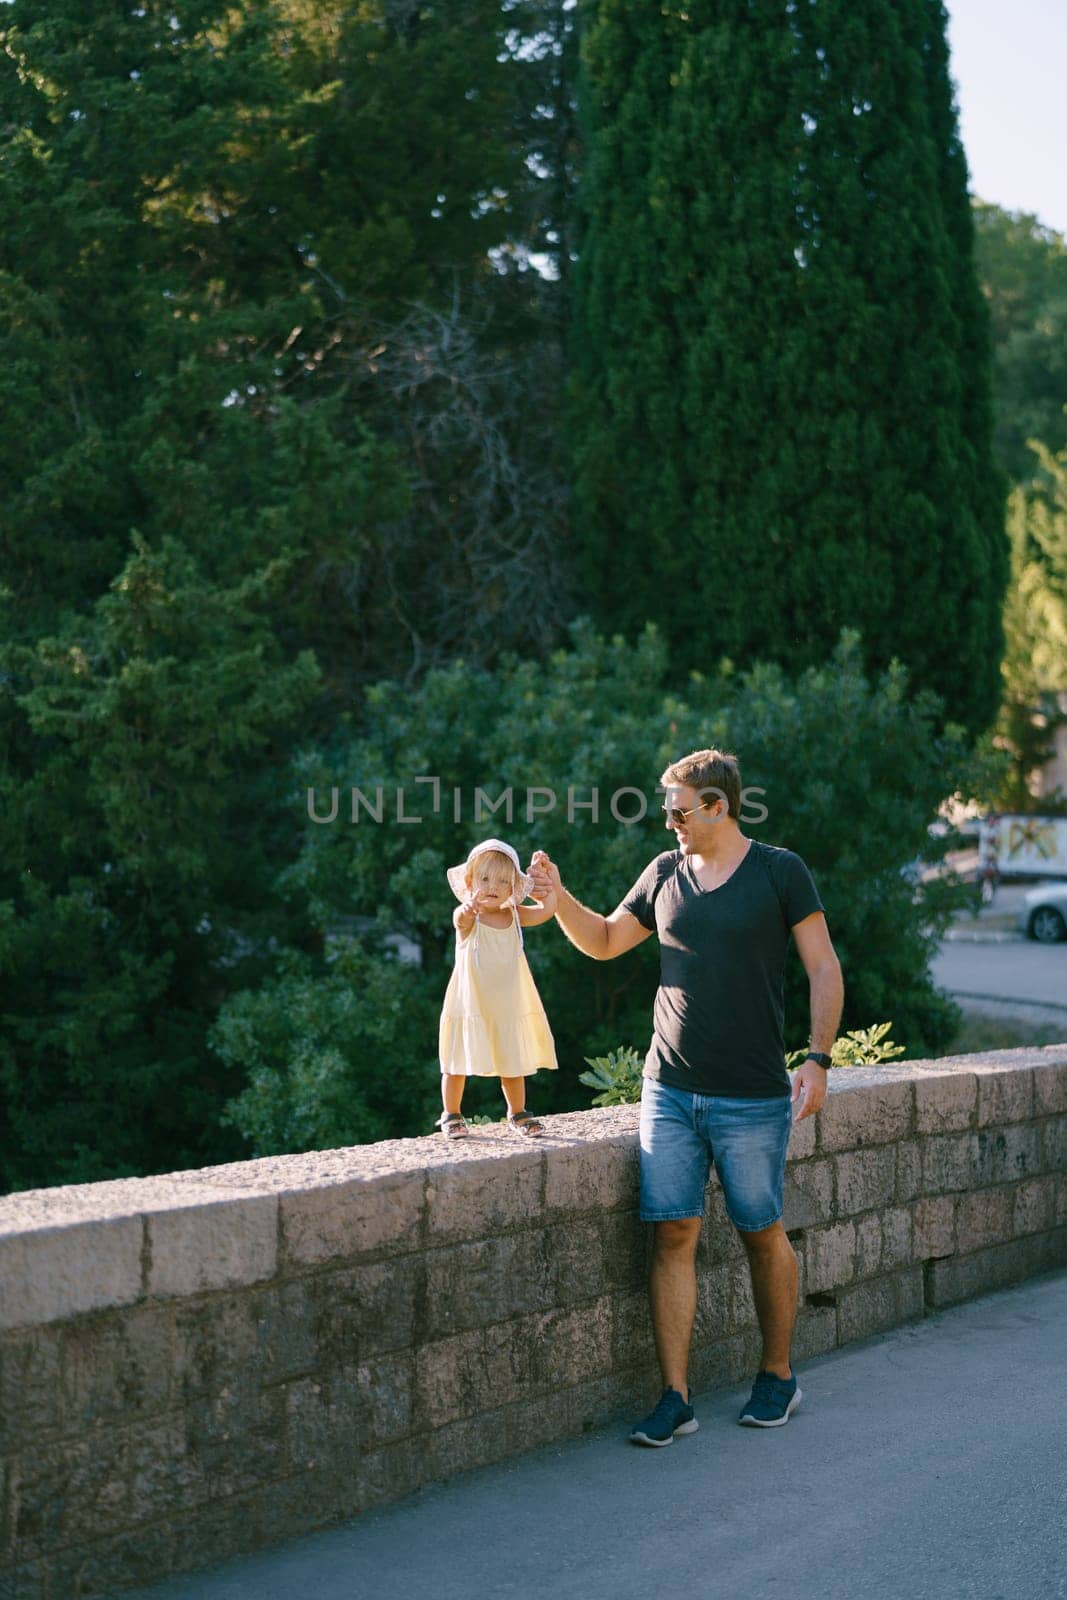 Dad leads a little girl by the hand along a stone fence in the park. High quality photo